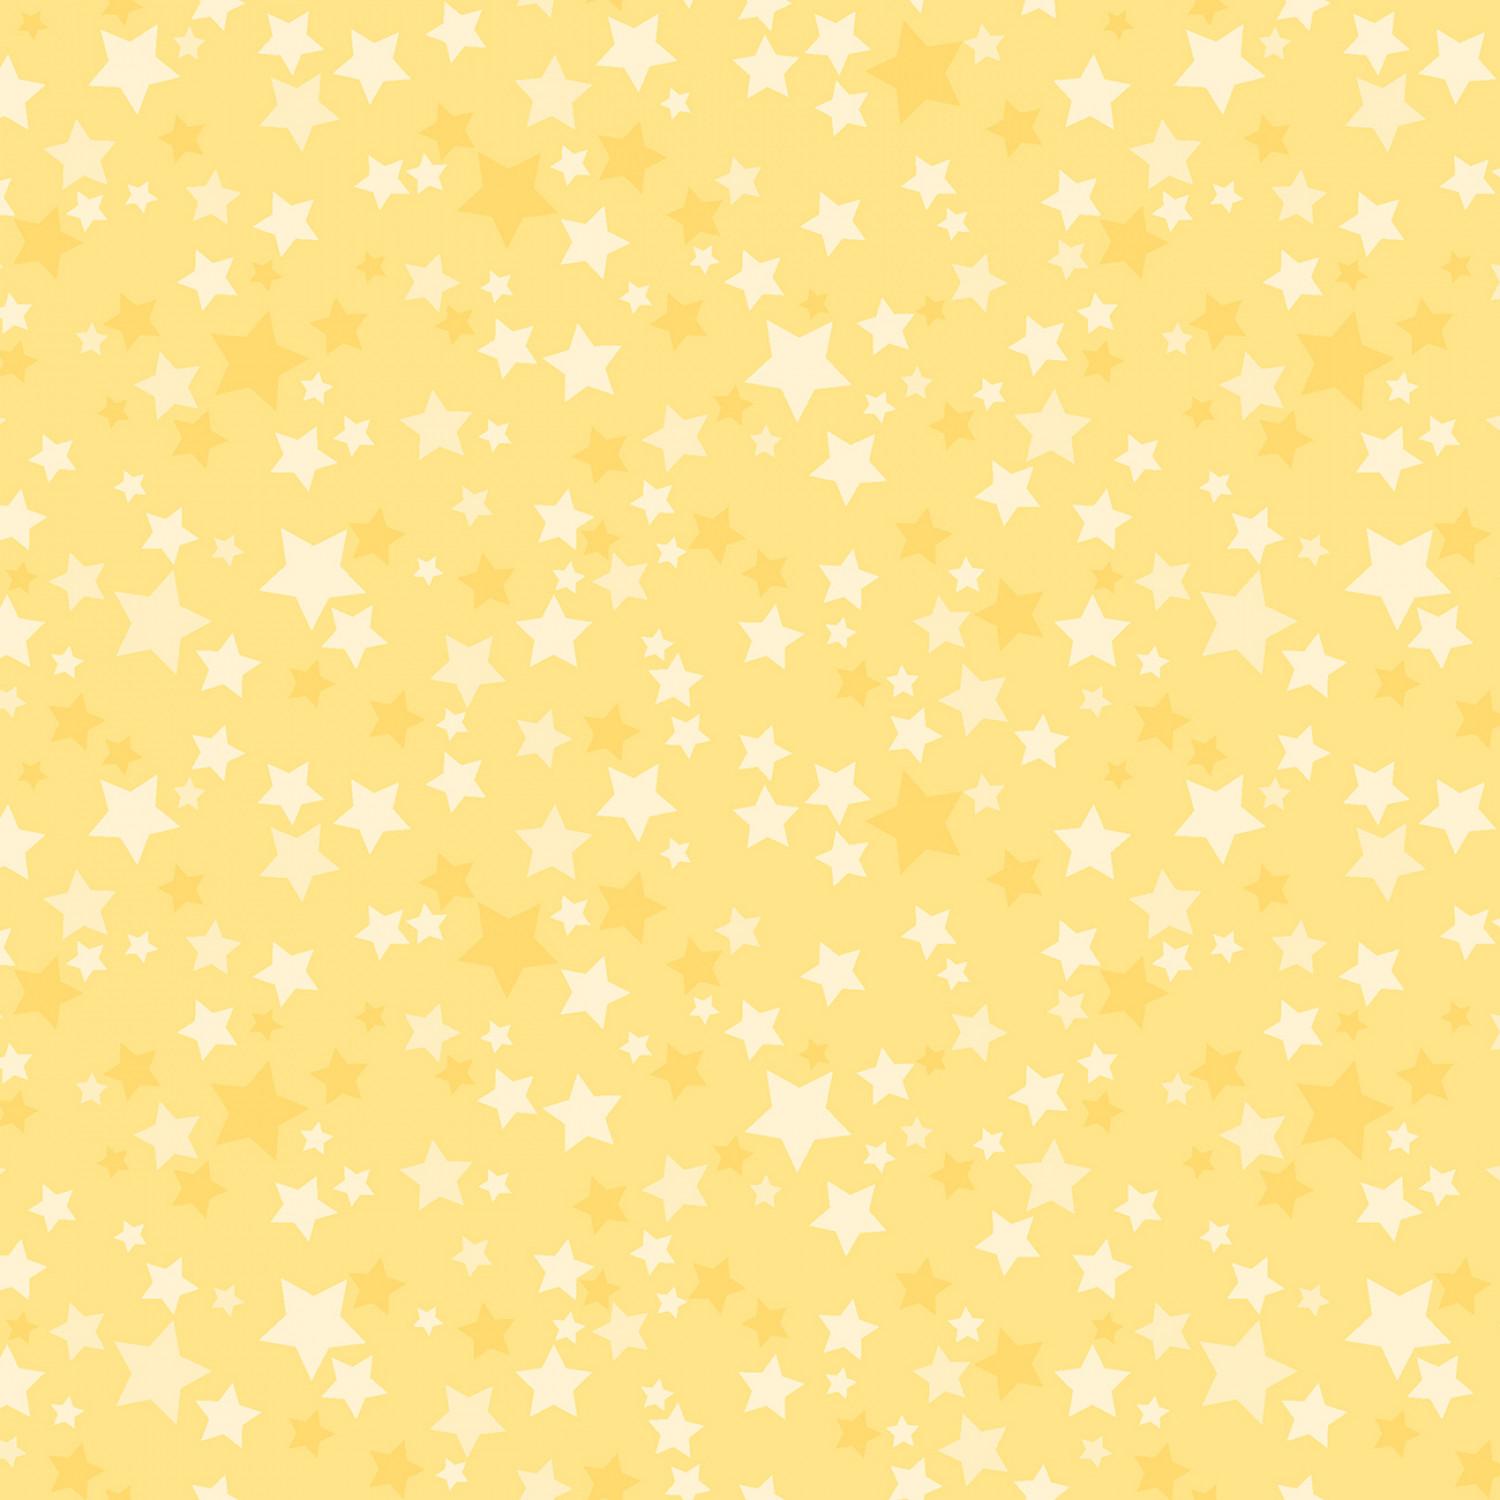 Playtime Flannel - Stars - Yellow - MASF10692-S